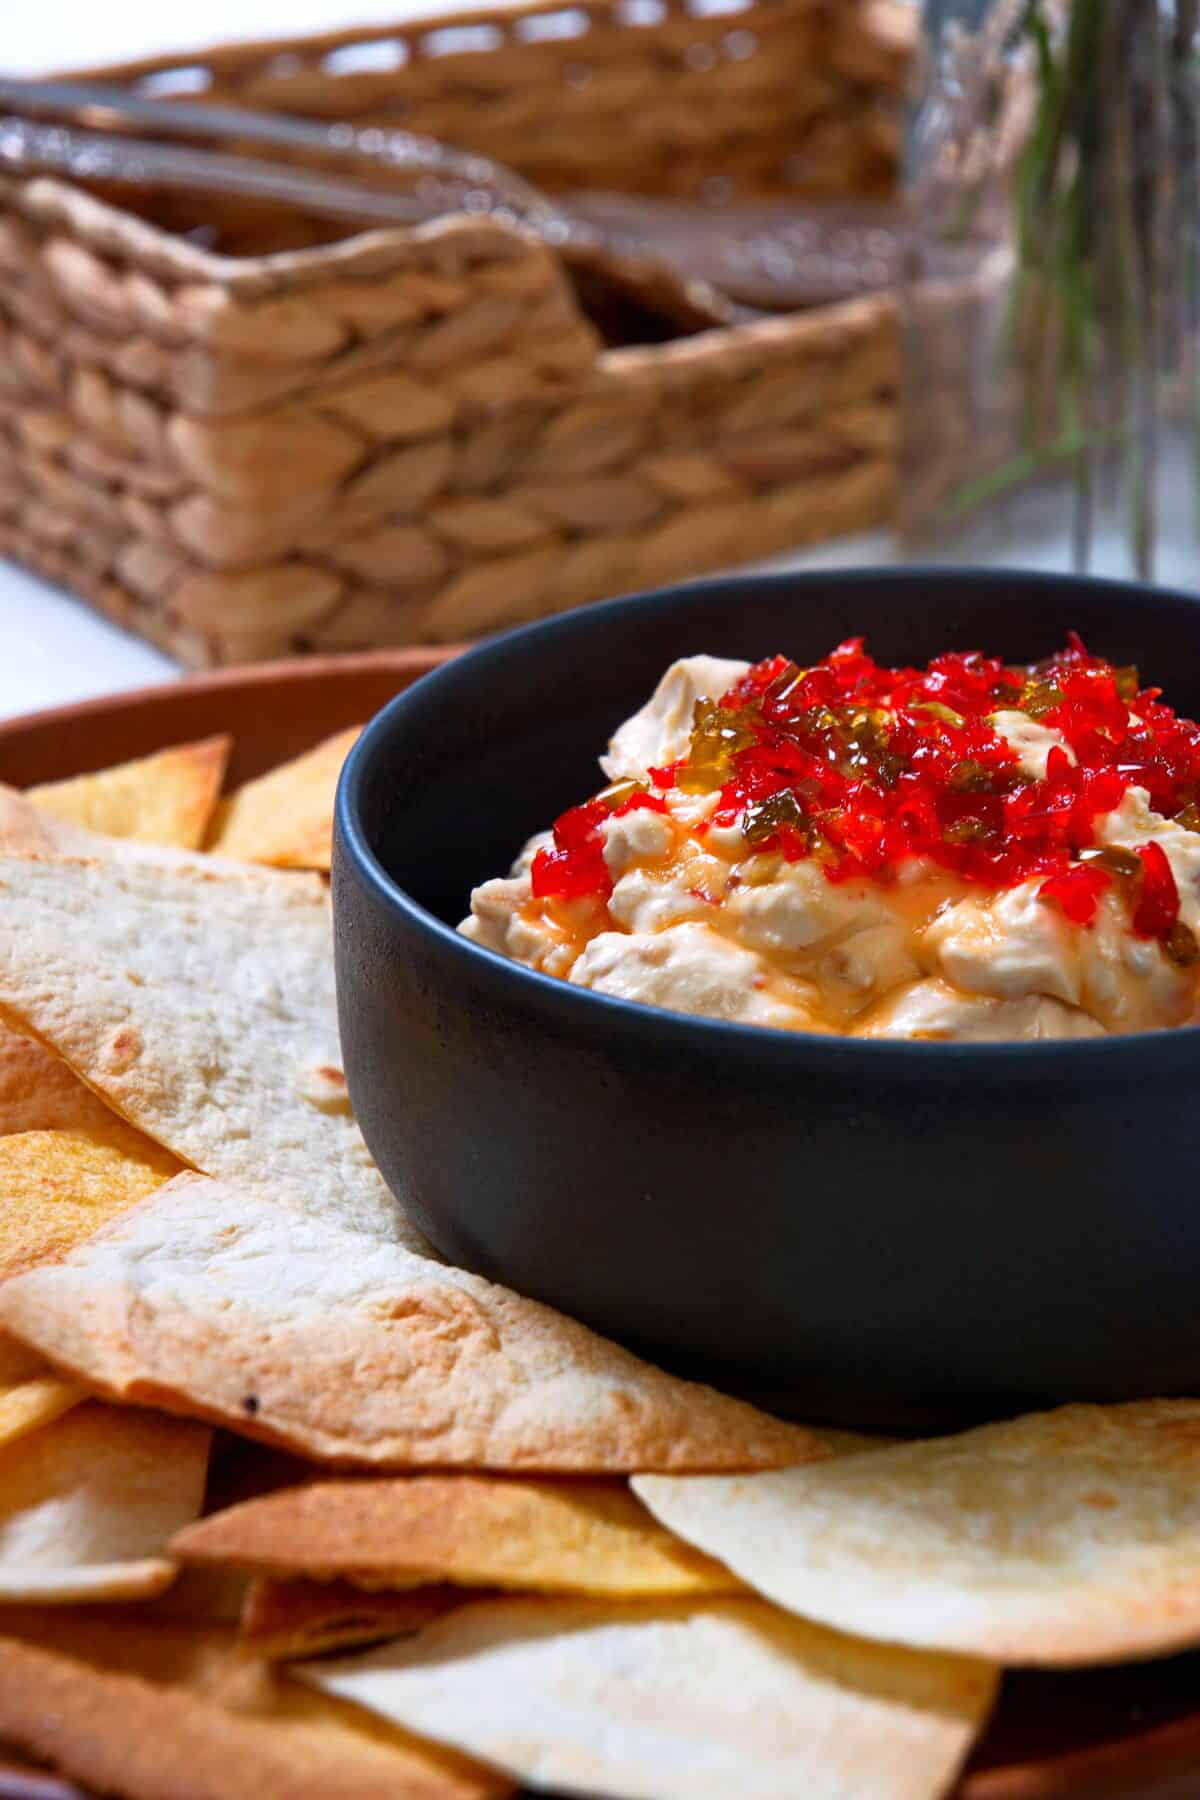 Kimchi cream cheese spread in a small black bowl, surrounded by tortilla chips.